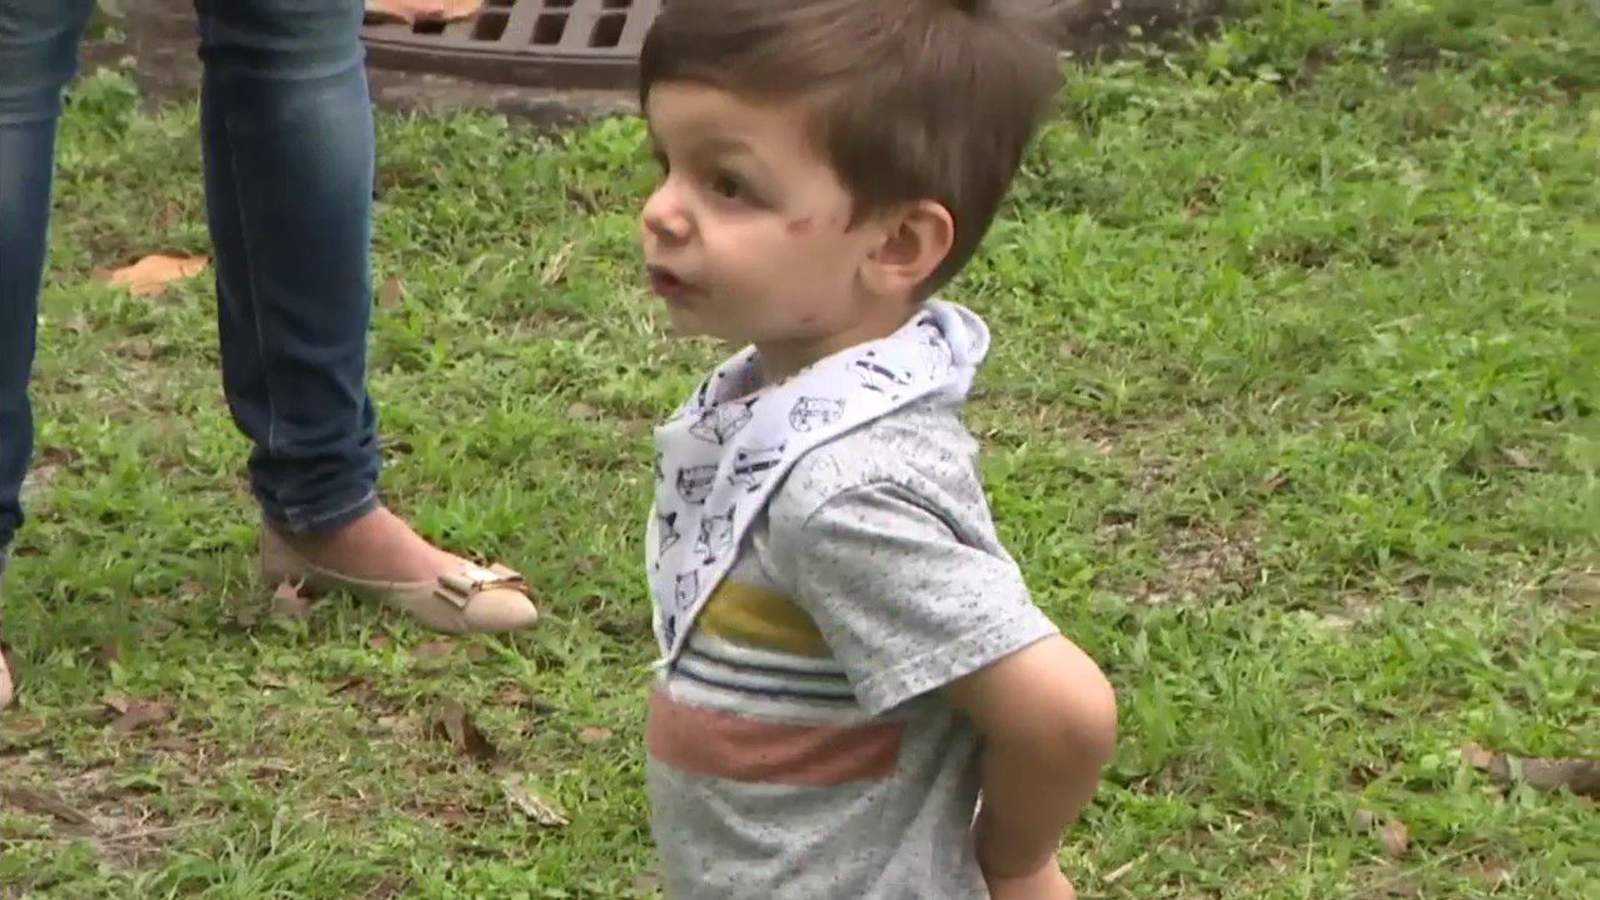 Dog attacks 2-year-old and father in popular Miami park